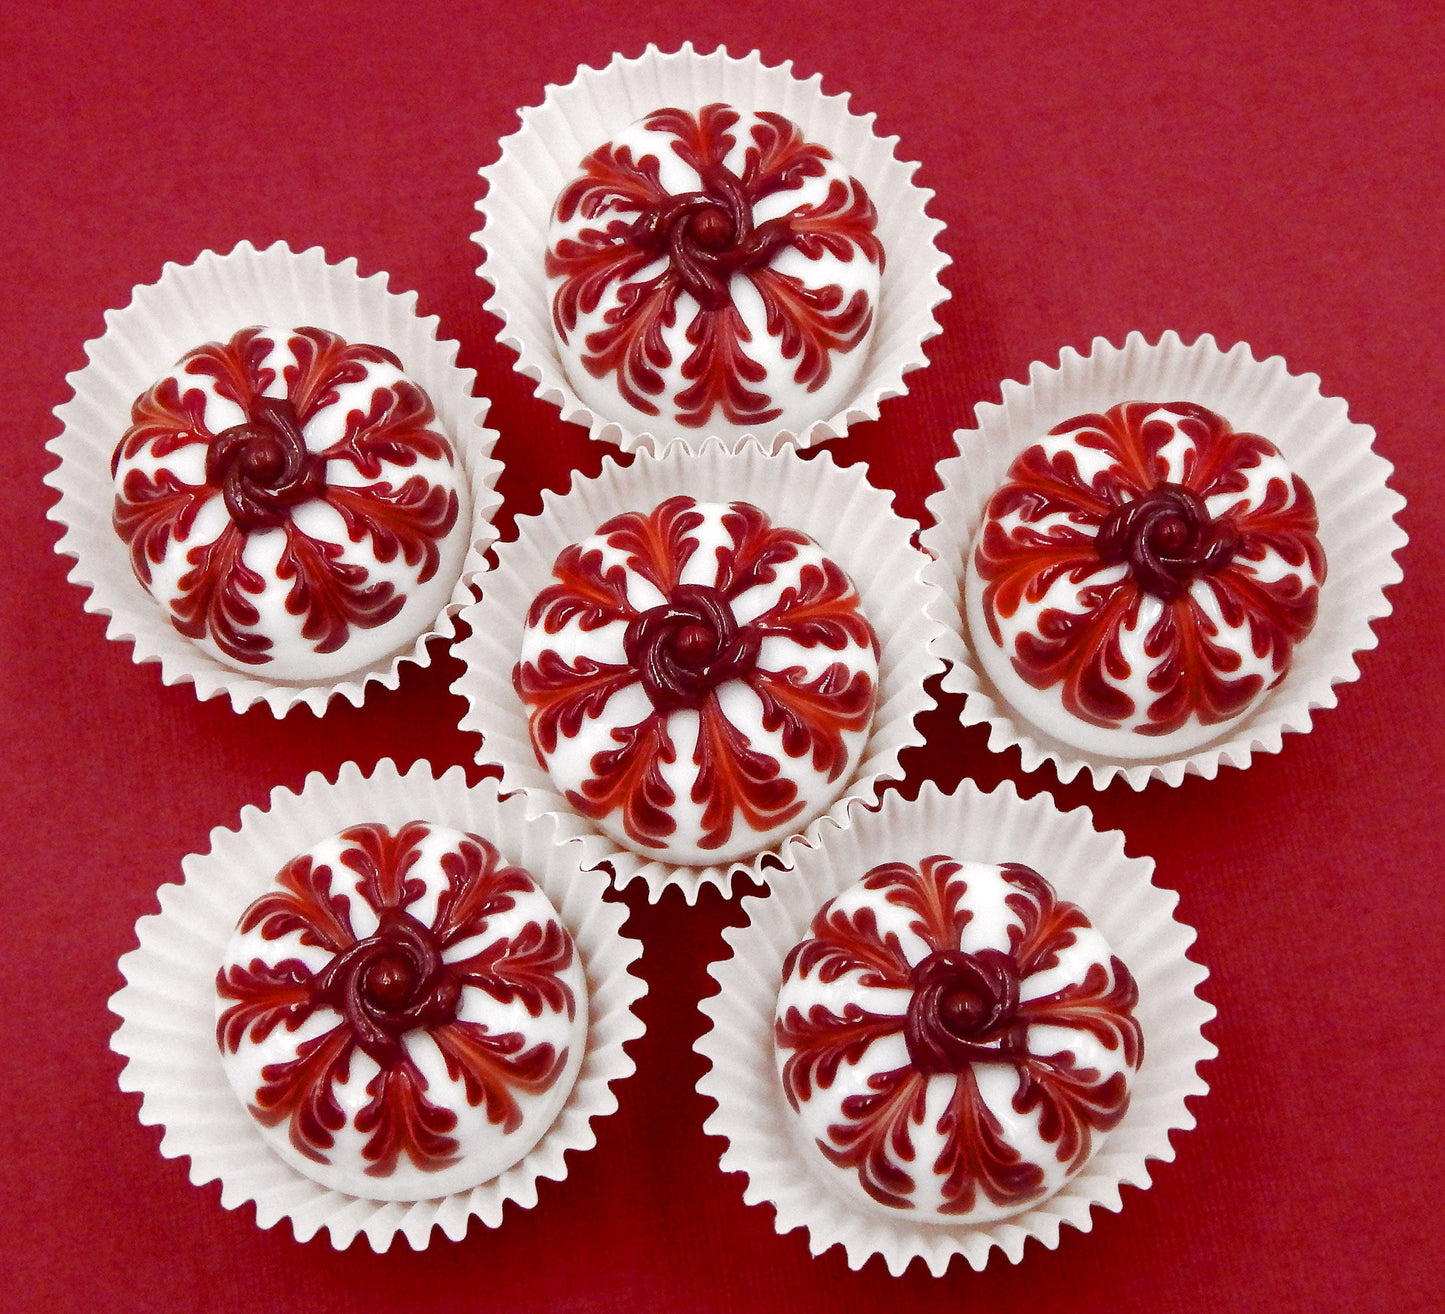 Art Glass Treats with Embellished Design #1 (18-131+)